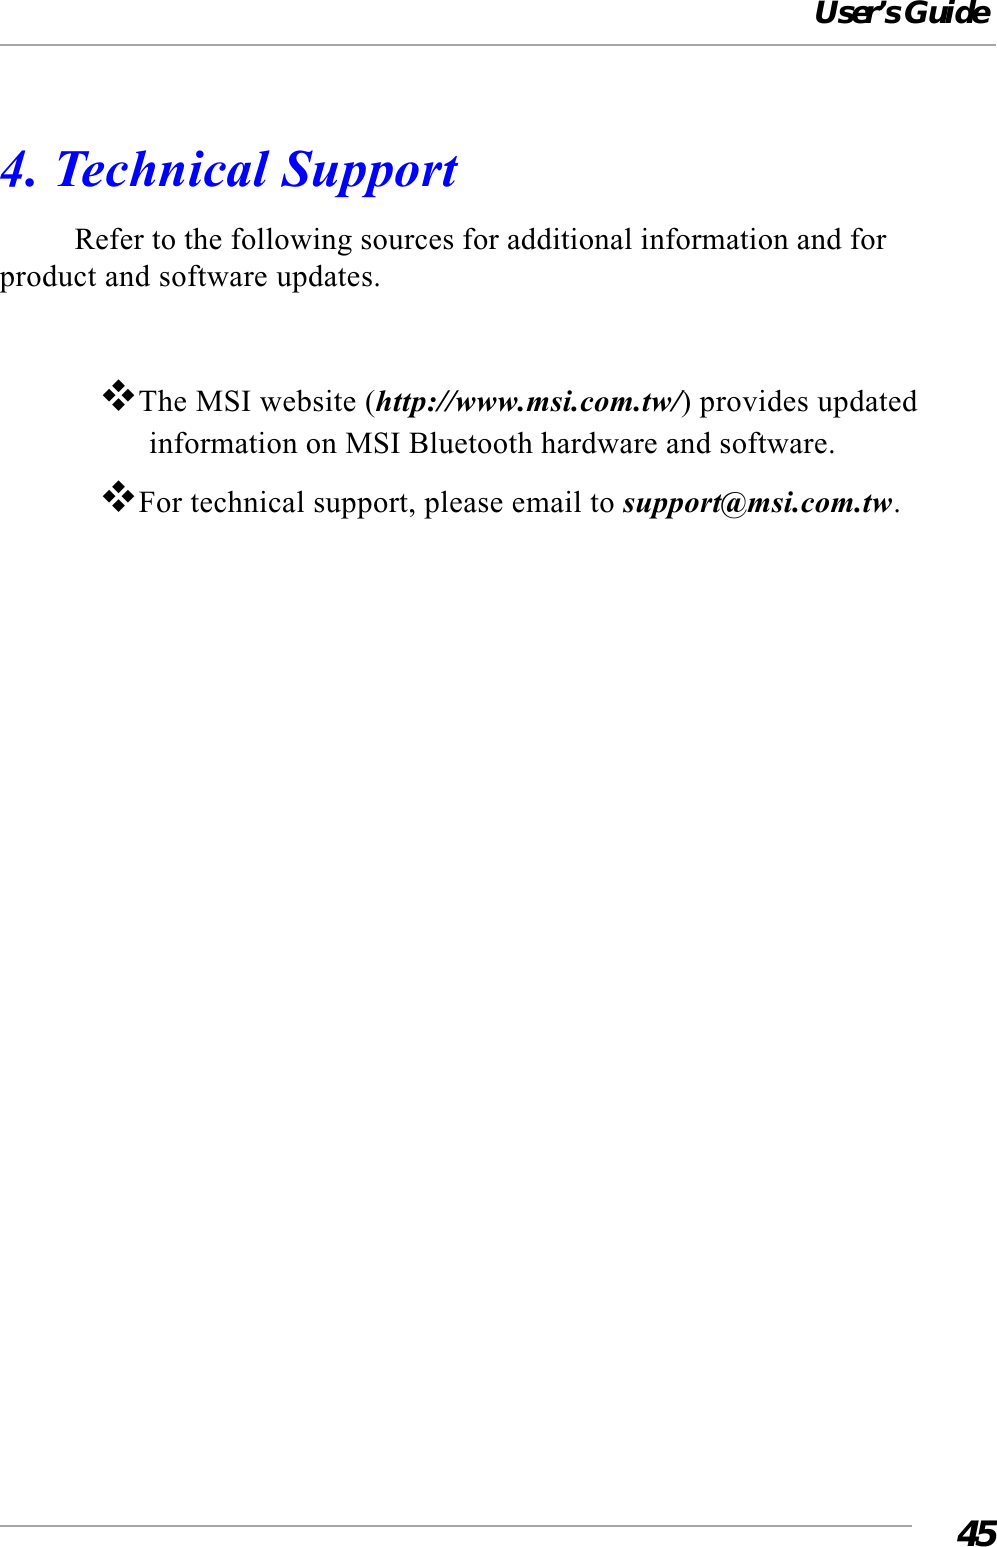 User’s Guide454. Technical SupportRefer to the following sources for additional information and forproduct and software updates.The MSI website (http://www.msi.com.tw/) provides updatedinformation on MSI Bluetooth hardware and software.For technical support, please email to support@msi.com.tw.